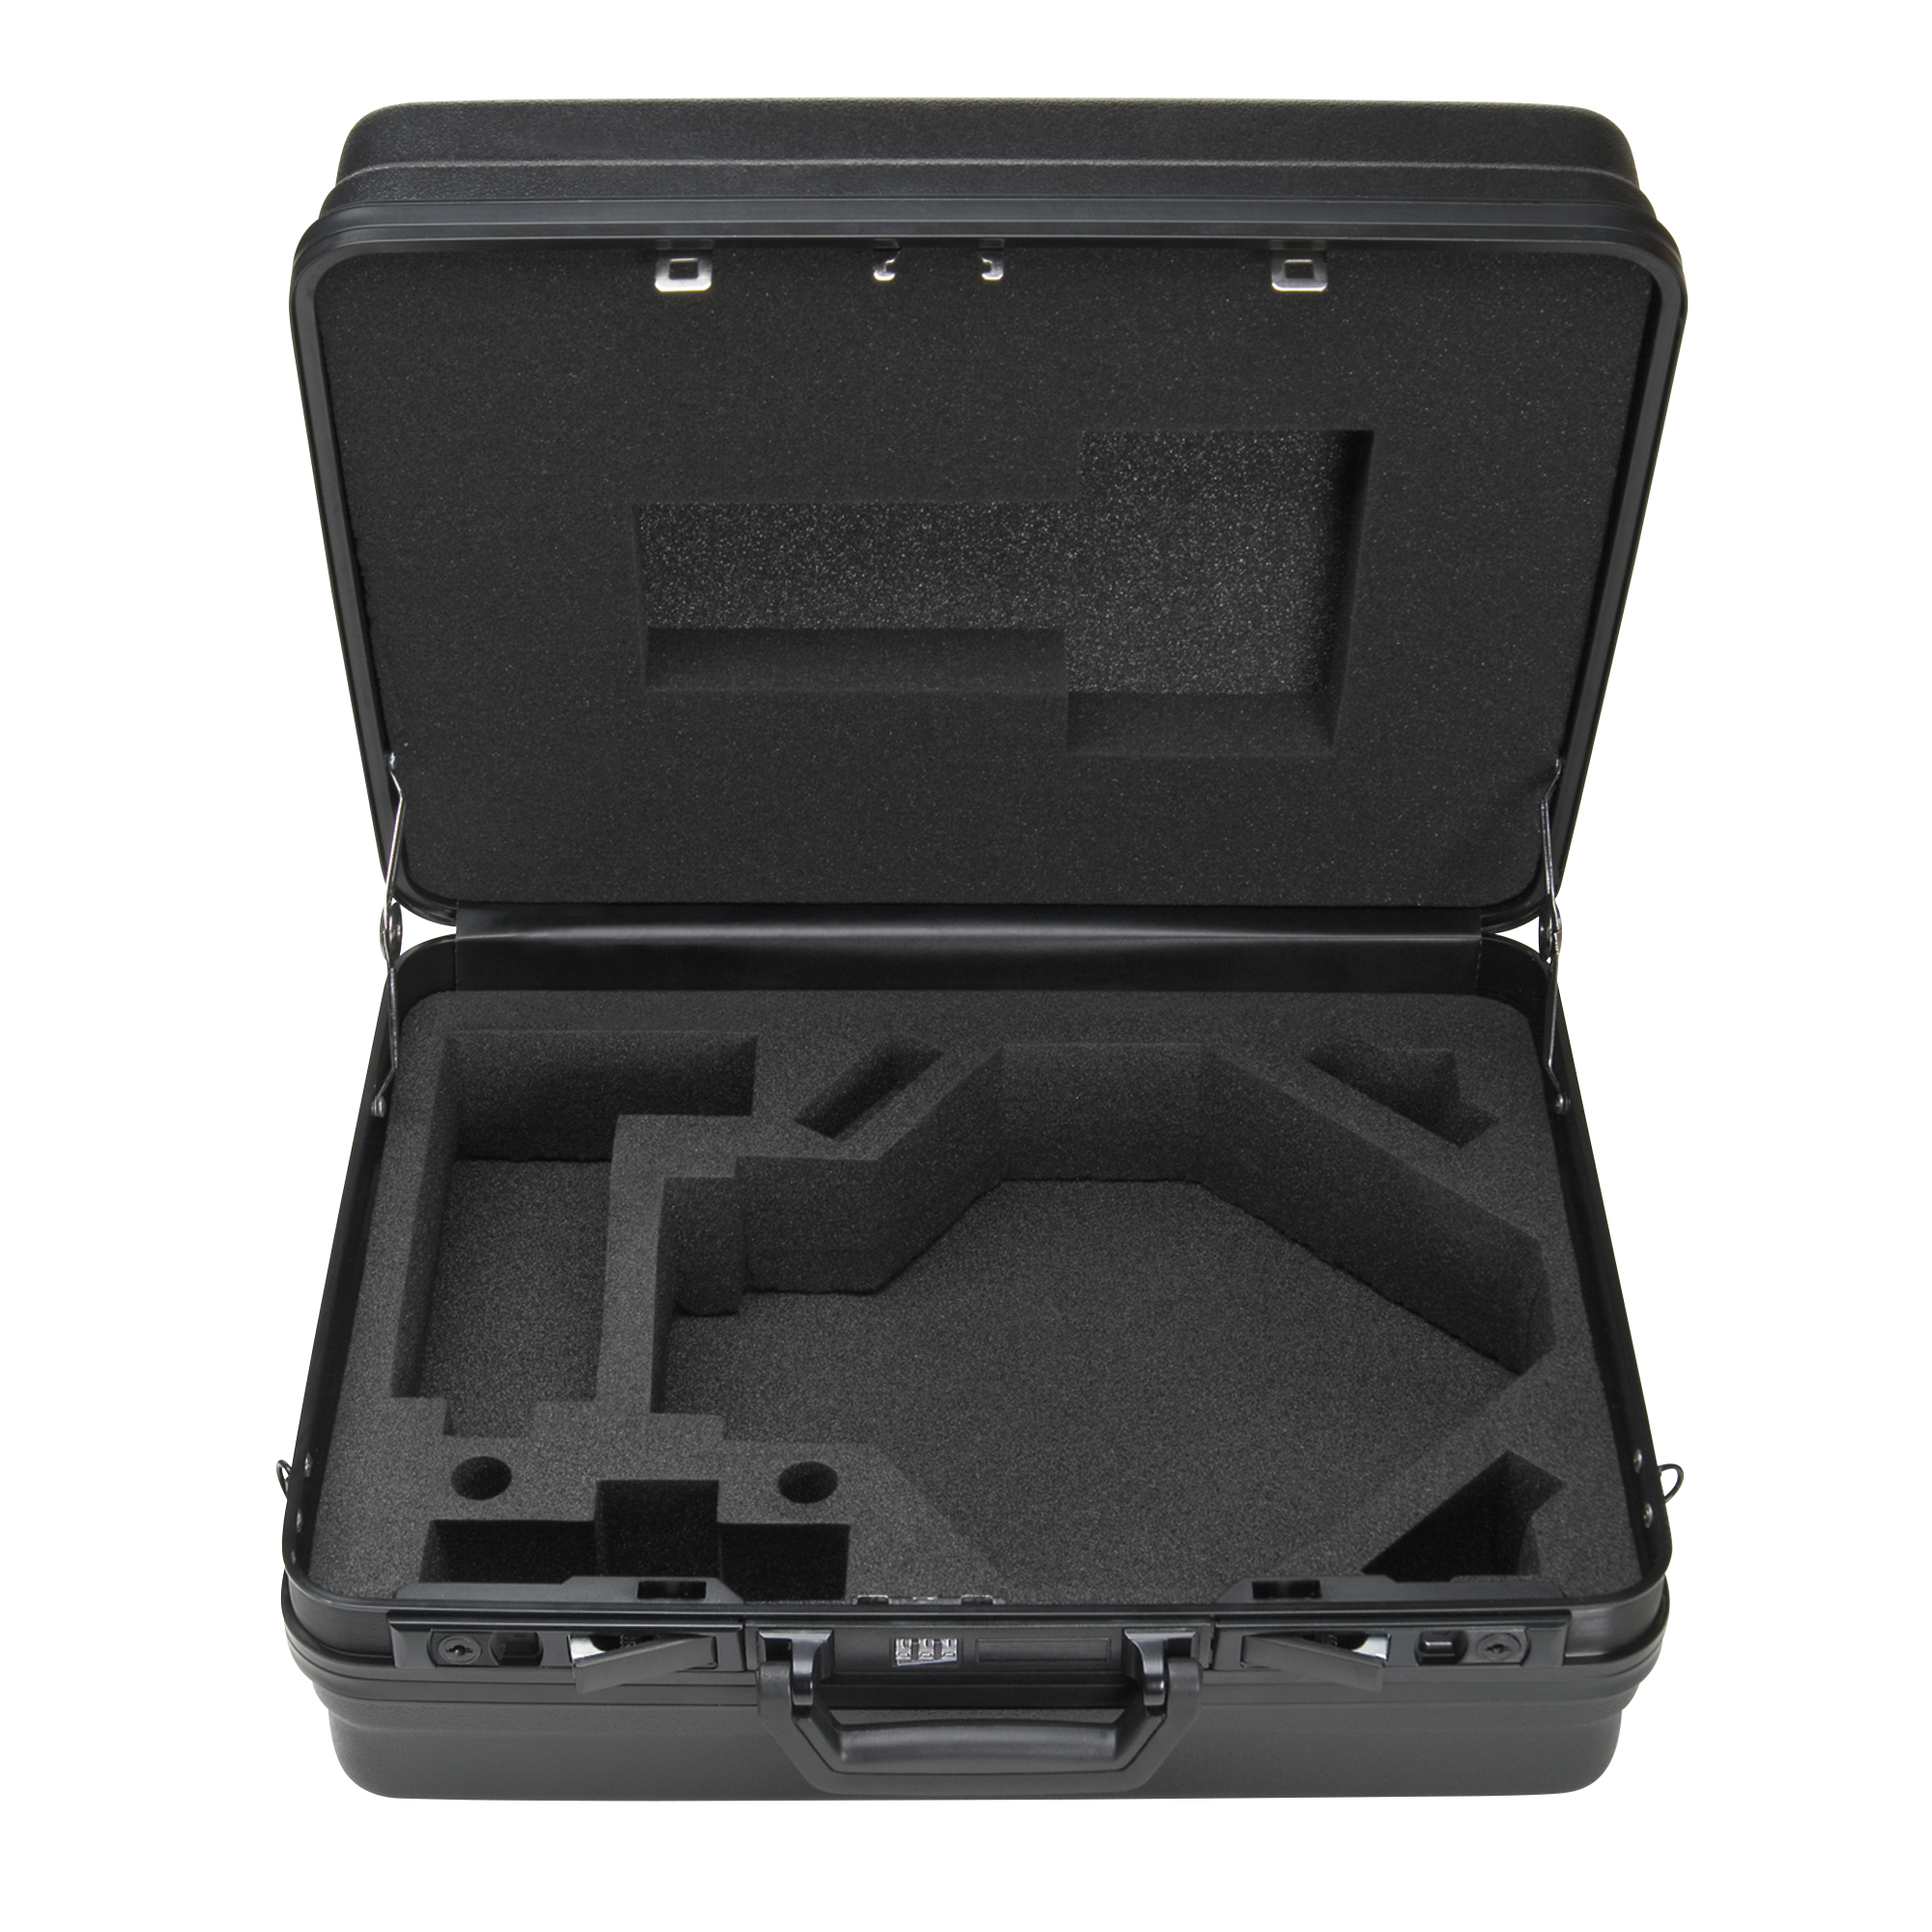 HEINE Hard case for Indirect Ophthalmoscope Sets C-283 and C-284